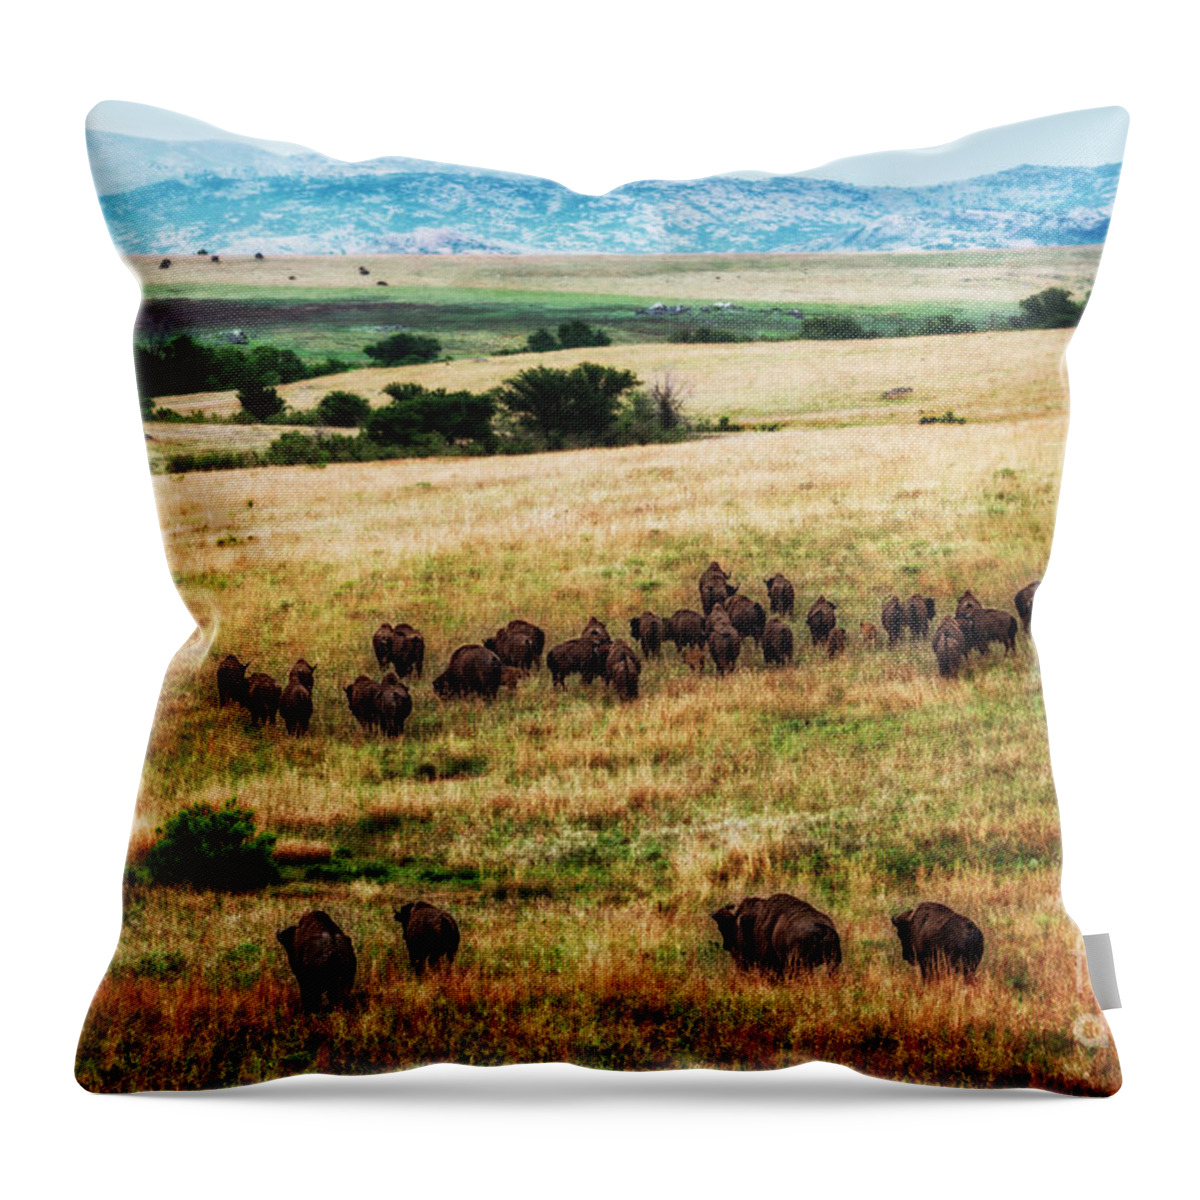 Buffalo Throw Pillow featuring the photograph The American Bison Herd by Tamyra Ayles